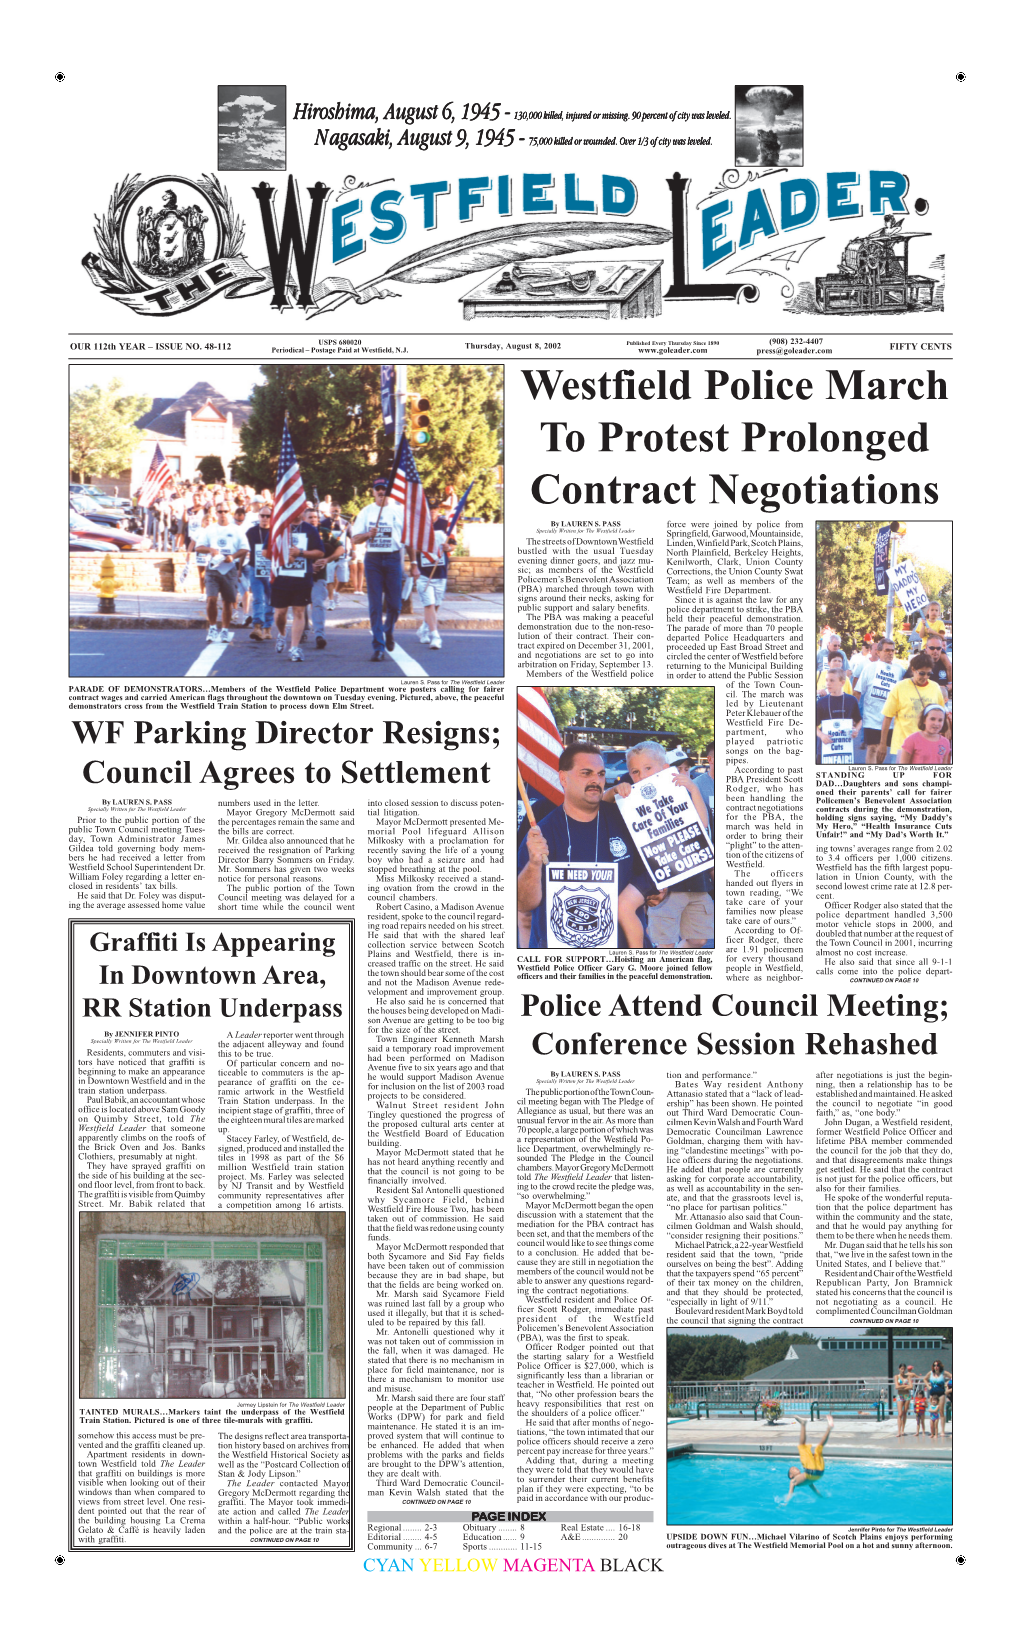 Westfield Police March to Protest Prolonged Contract Negotiations by LAUREN S